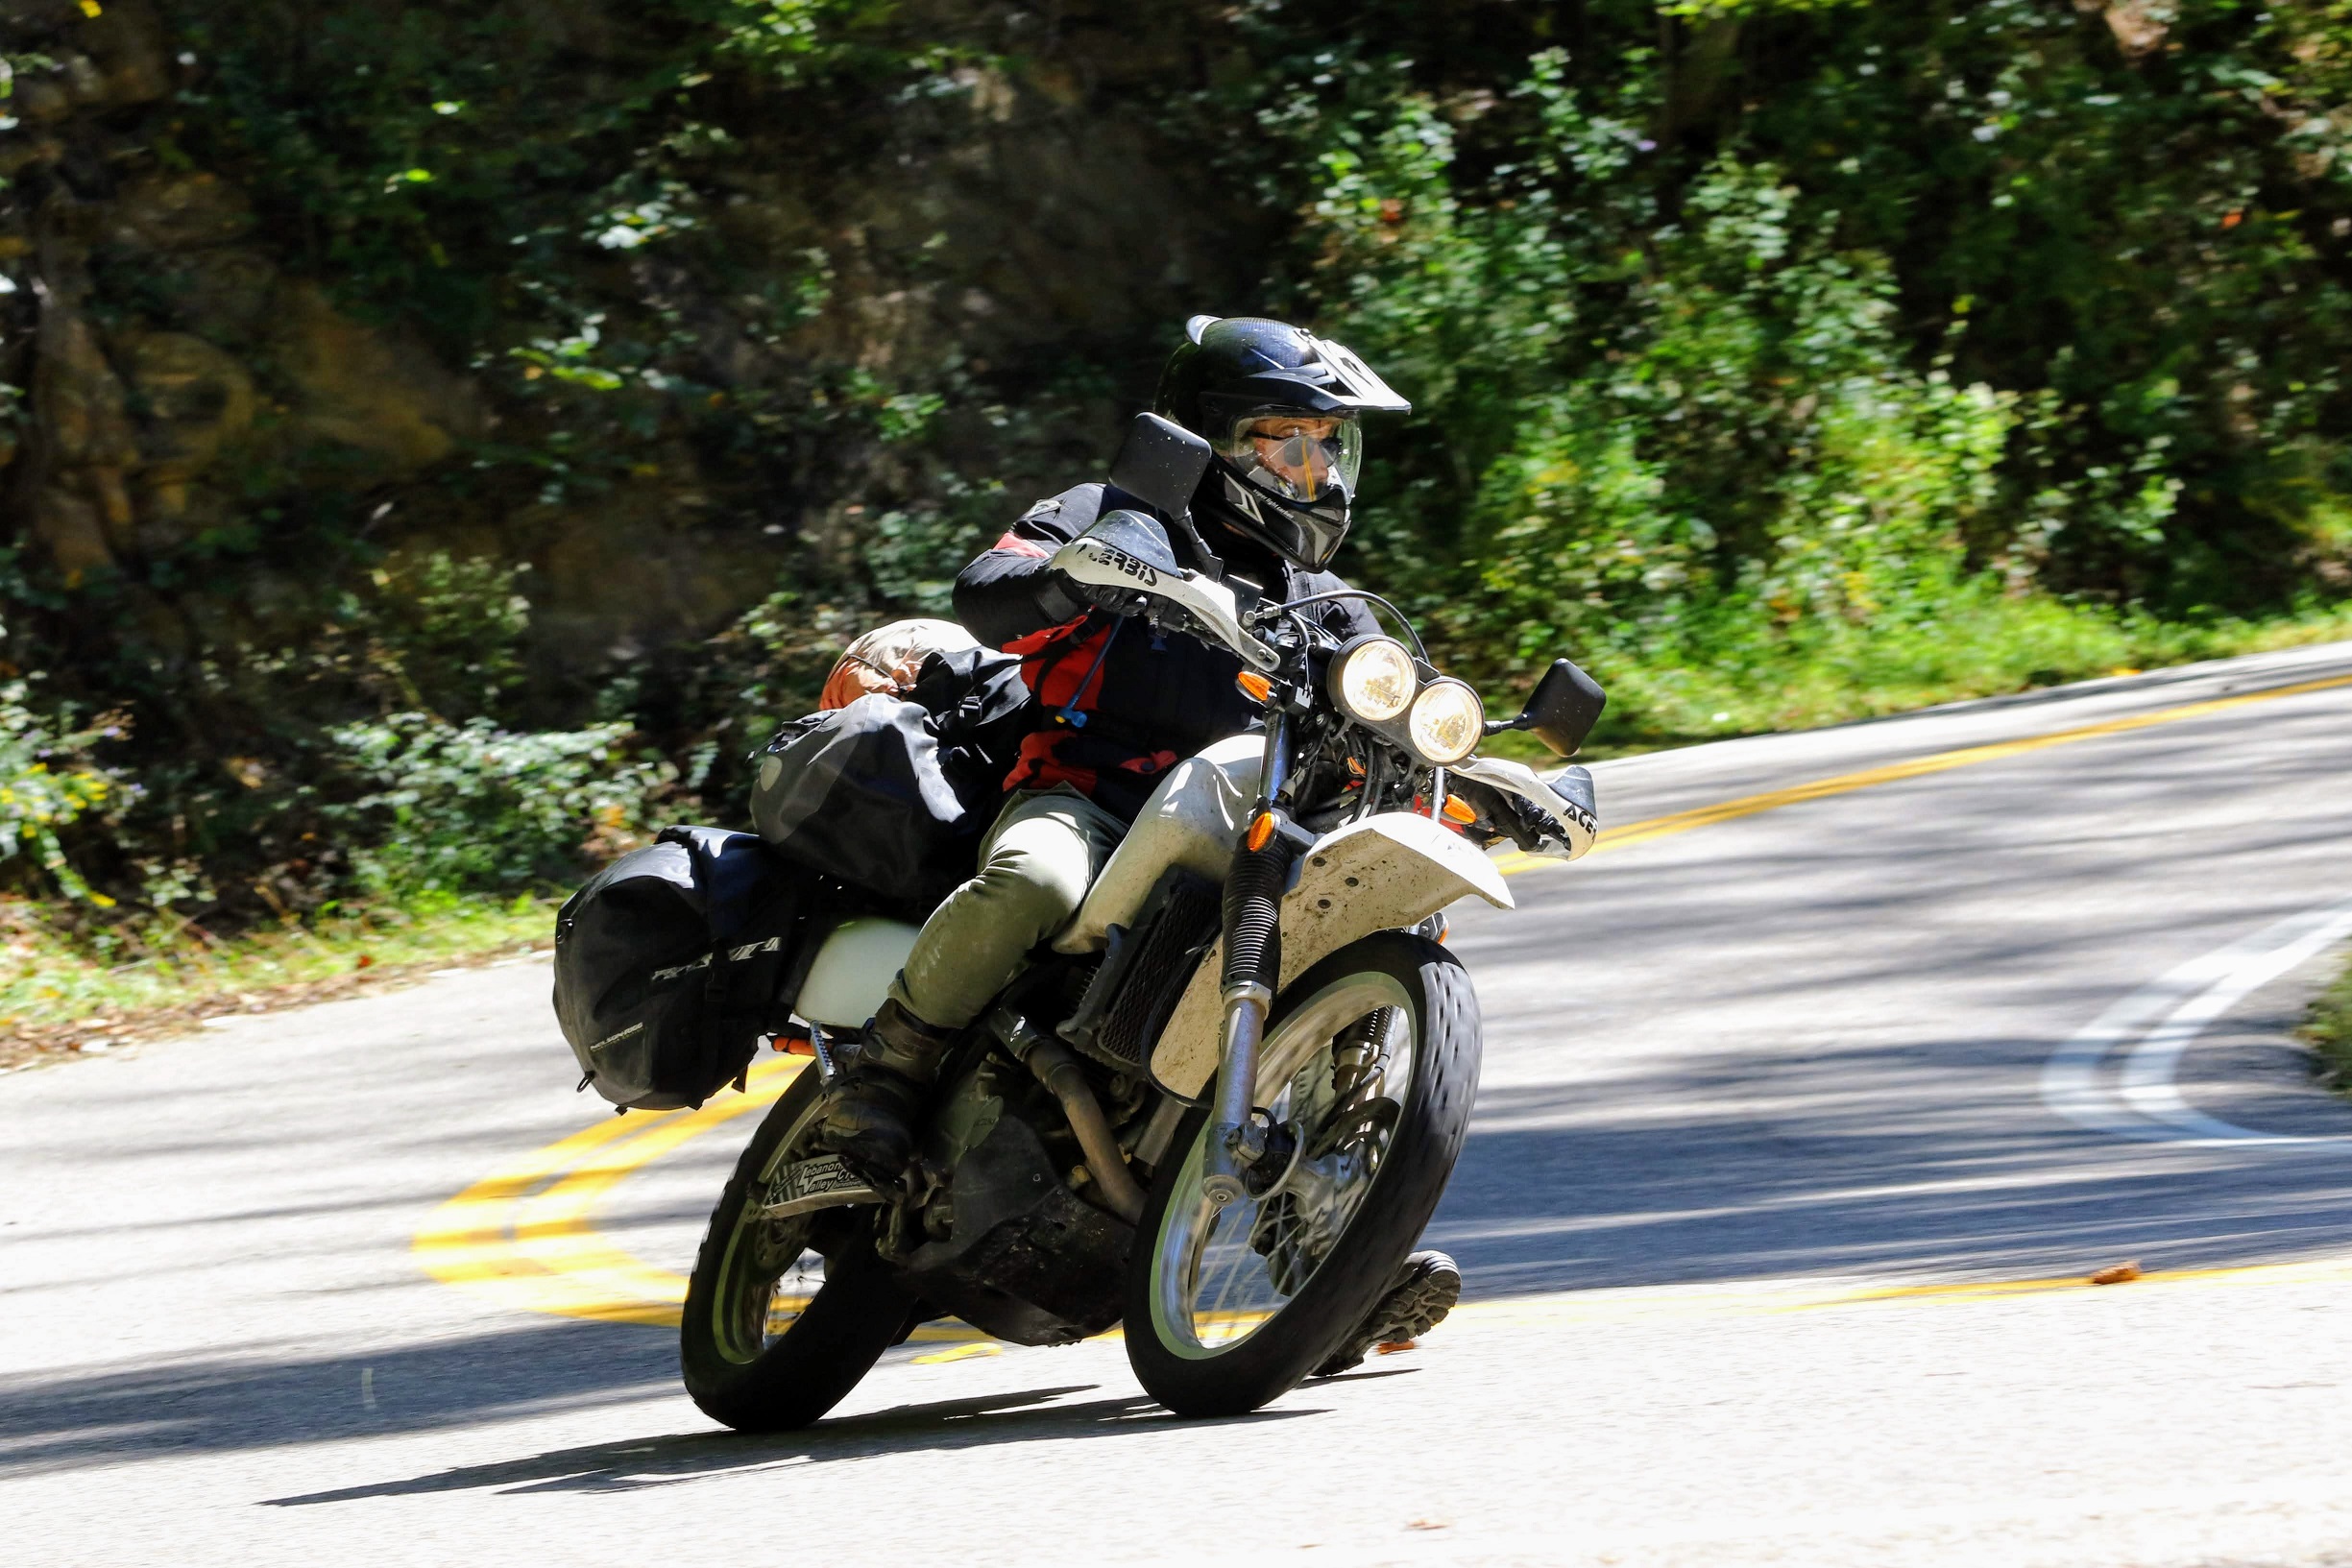 Me riding the mighty DR on the Tail of the Dragon, North Carolina, USA